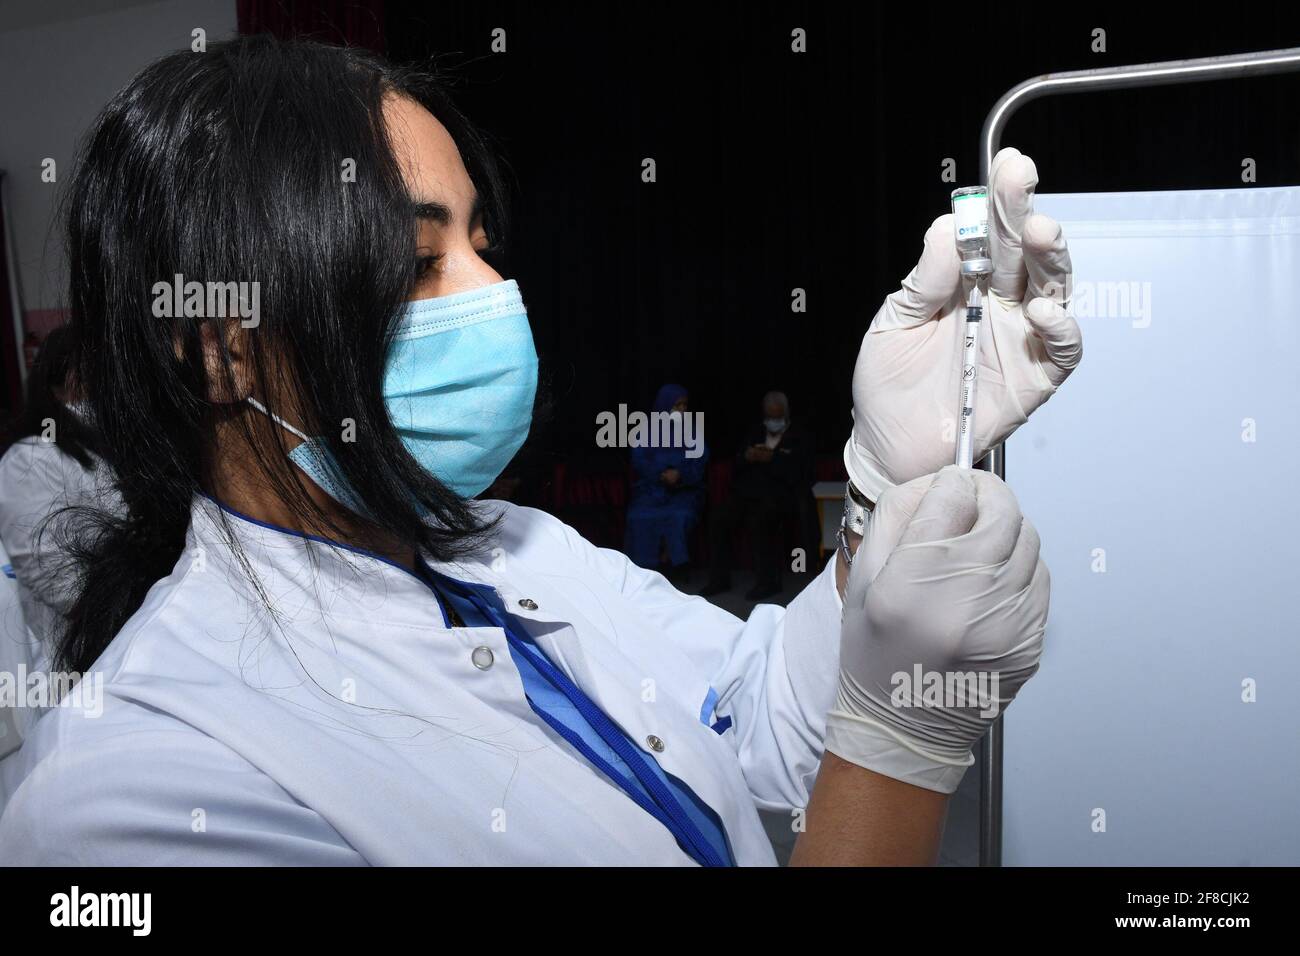 (210413) -- MOHAMMEDIA, April 13, 2021 (Xinhua) -- A medical worker prepares a dose of China's Sinopharm COVID-19 vaccine in Mohammedia, Morocco, on April 13, 2021. Morocco's COVID-19 tally rose to 502,277 on Monday as 175 new cases were registered during the past 24 hours. (Photo by Chadi/Xinhua) Stock Photo